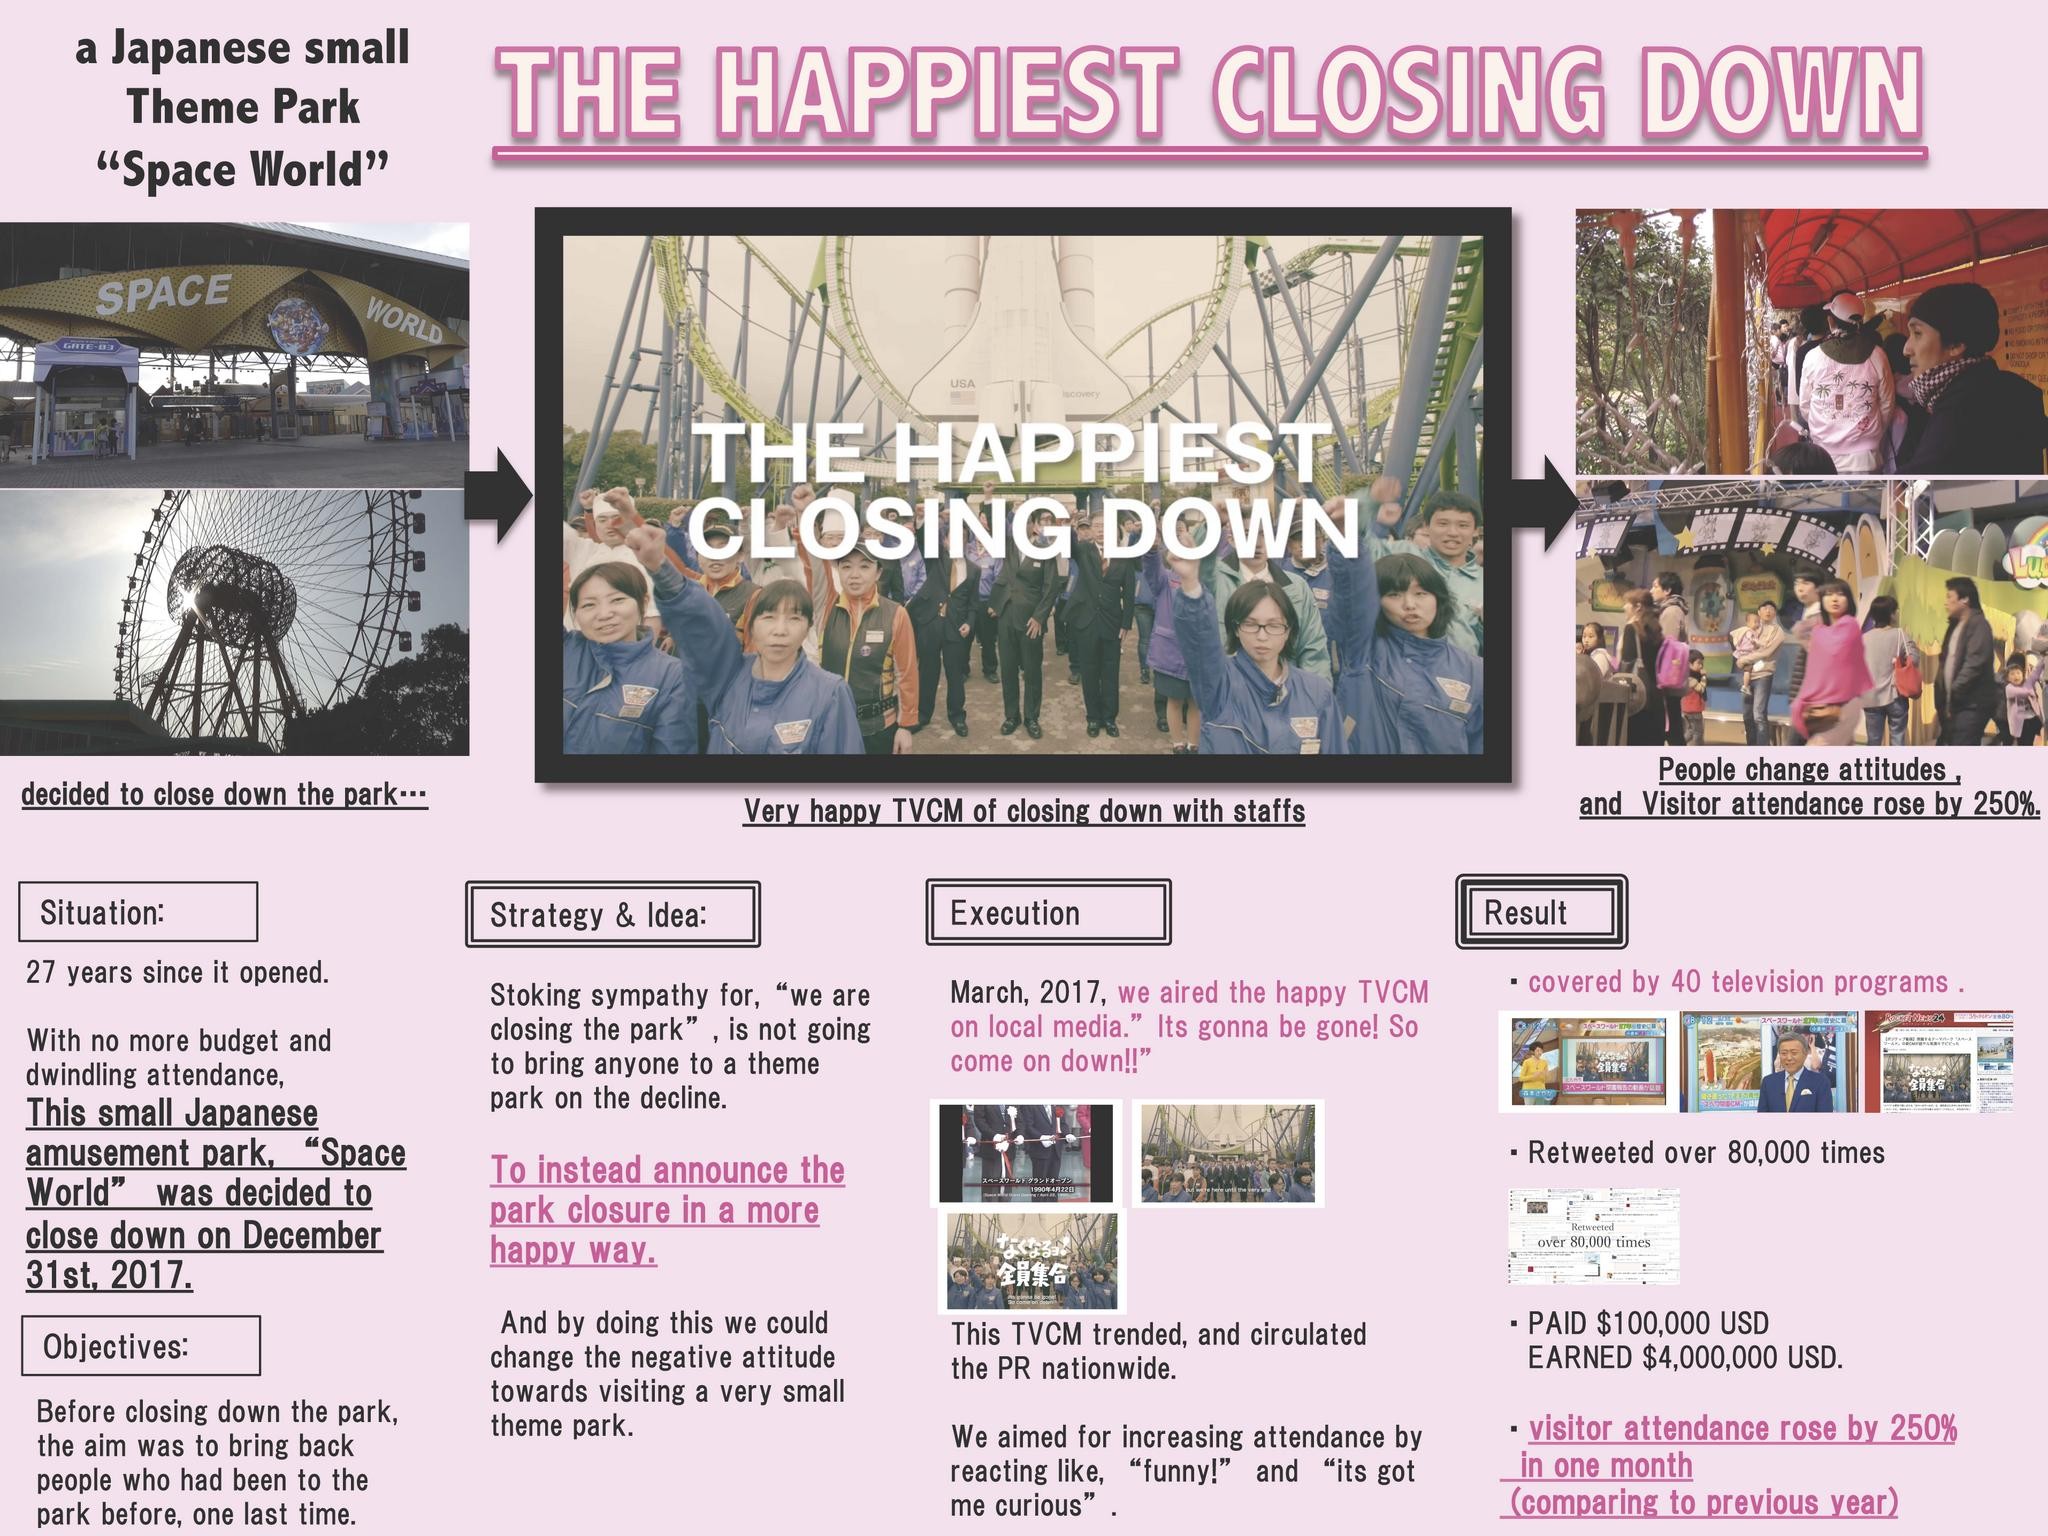 The Happiest Closing Down